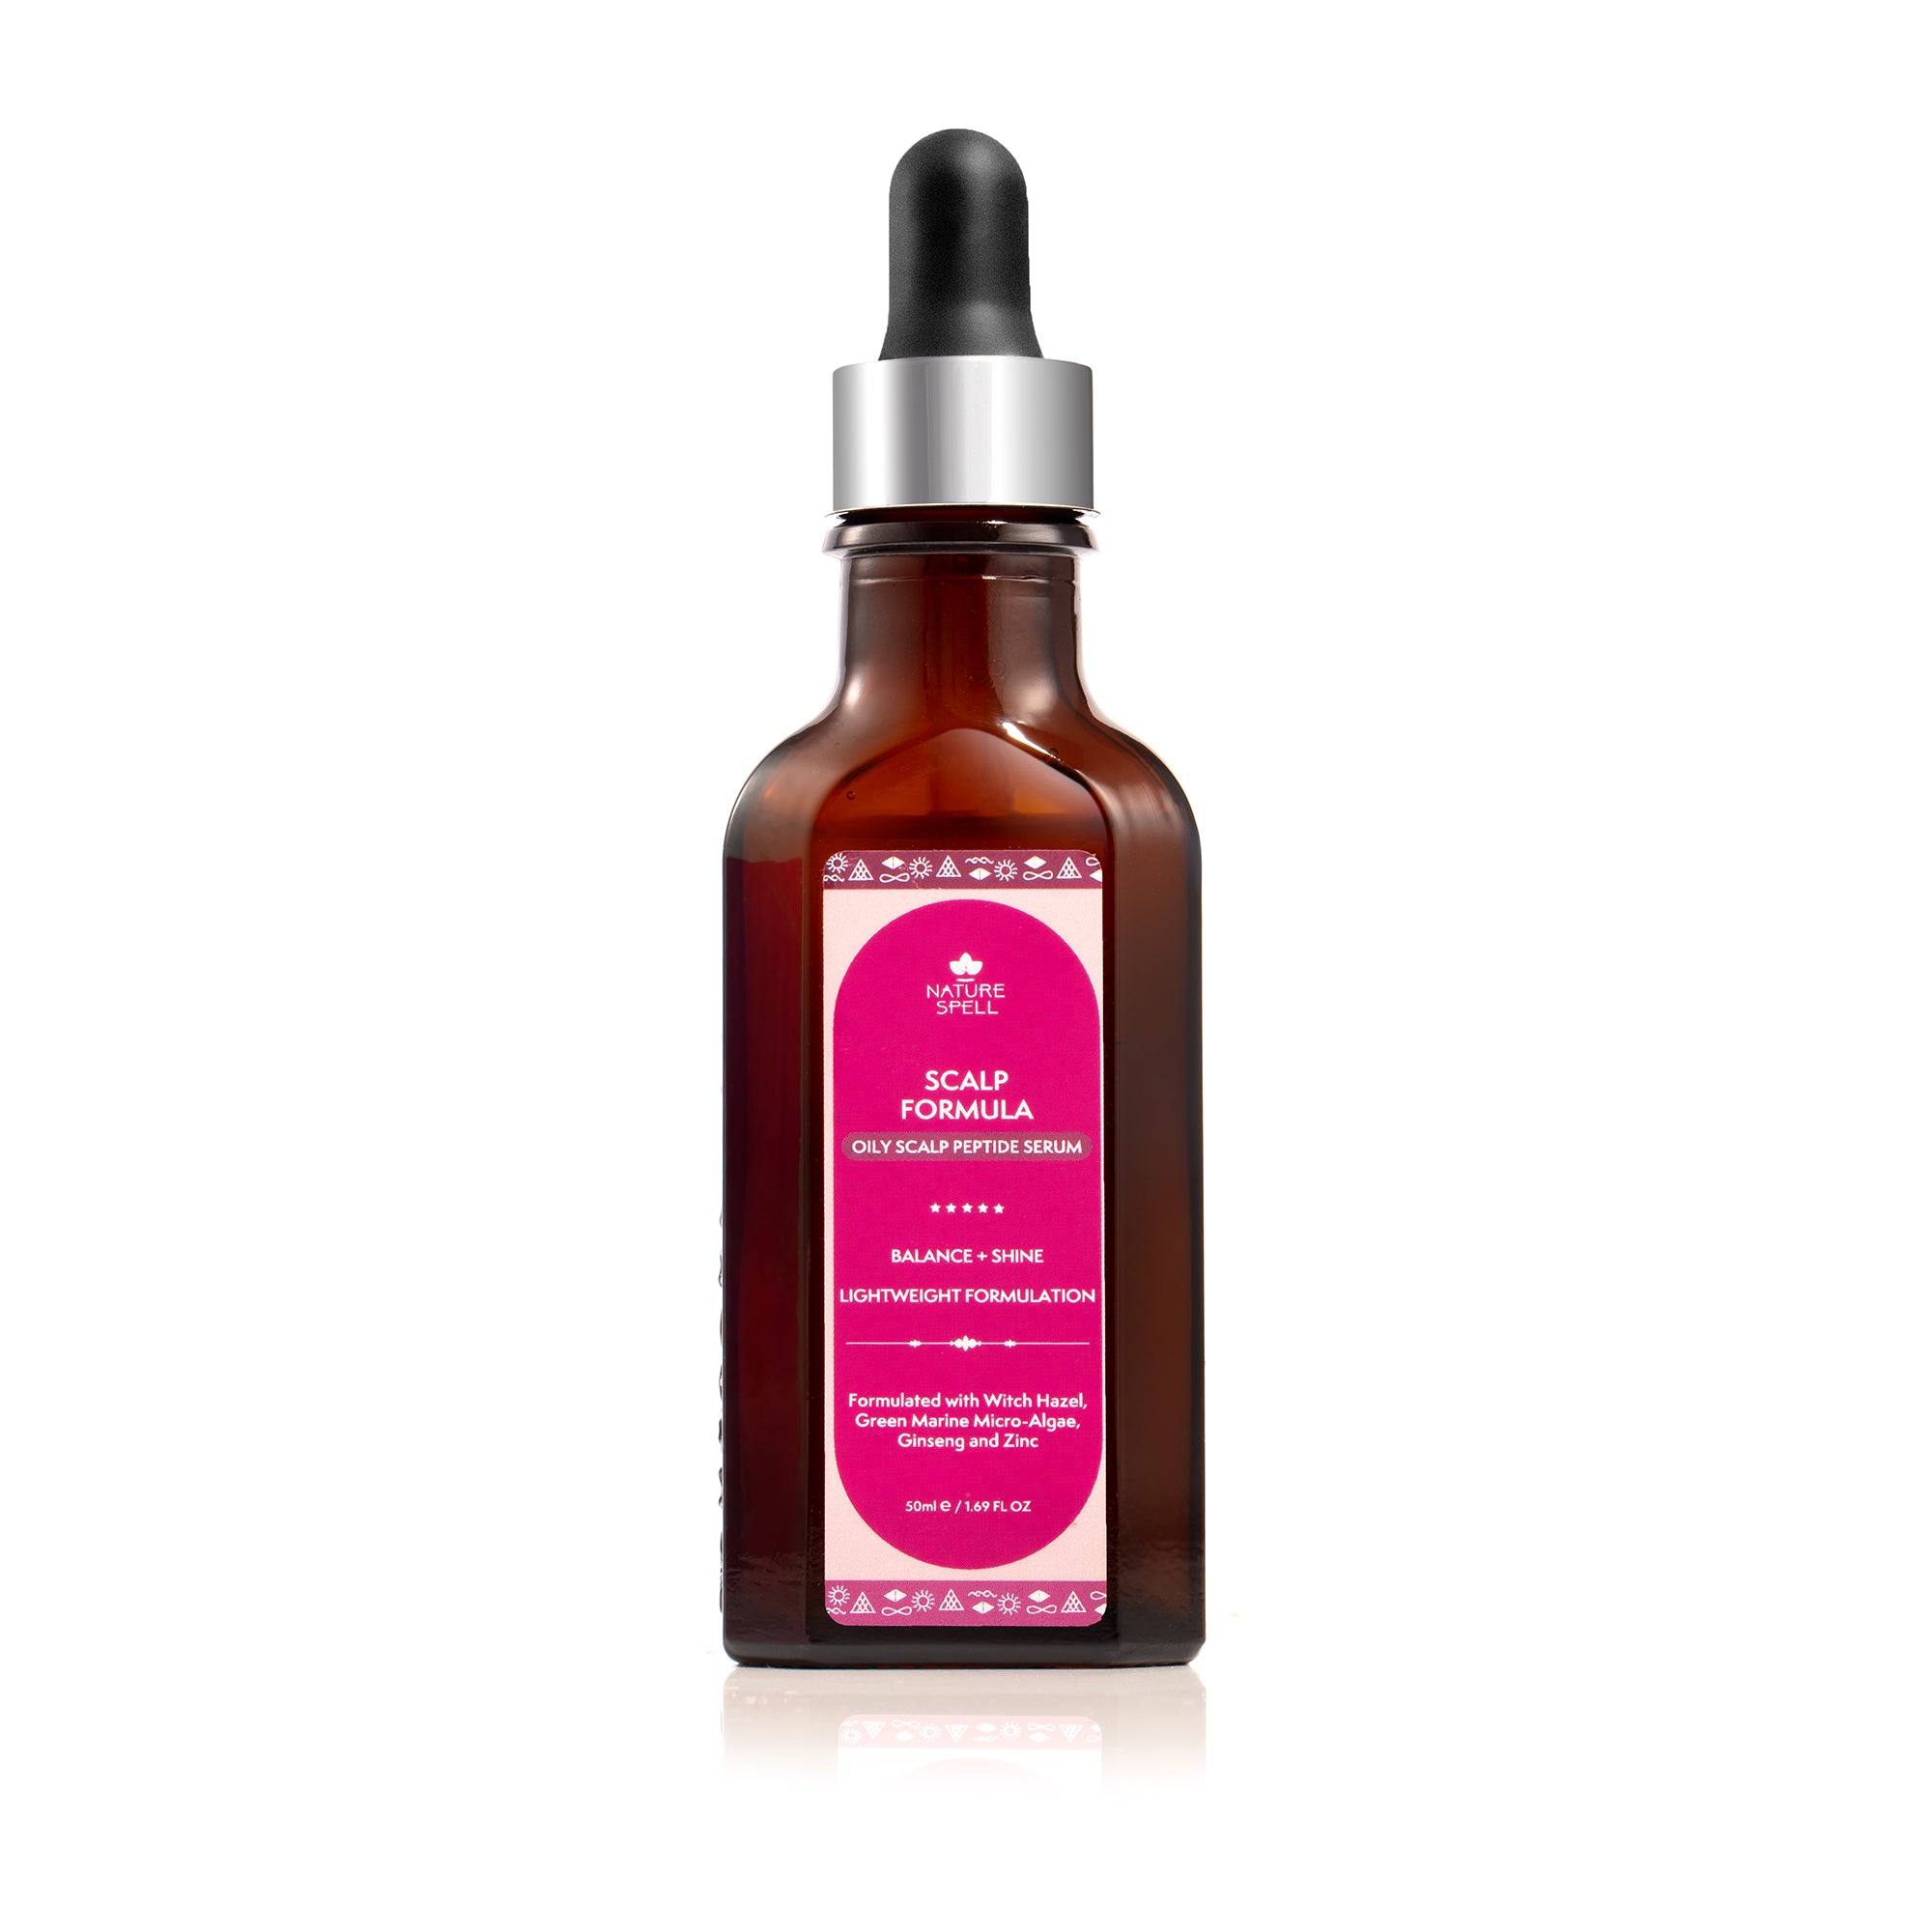 Oily Scalp Formula - Balance & Shine Peptide Serum for Oily Scalp with Ginseng + Witch Hazel